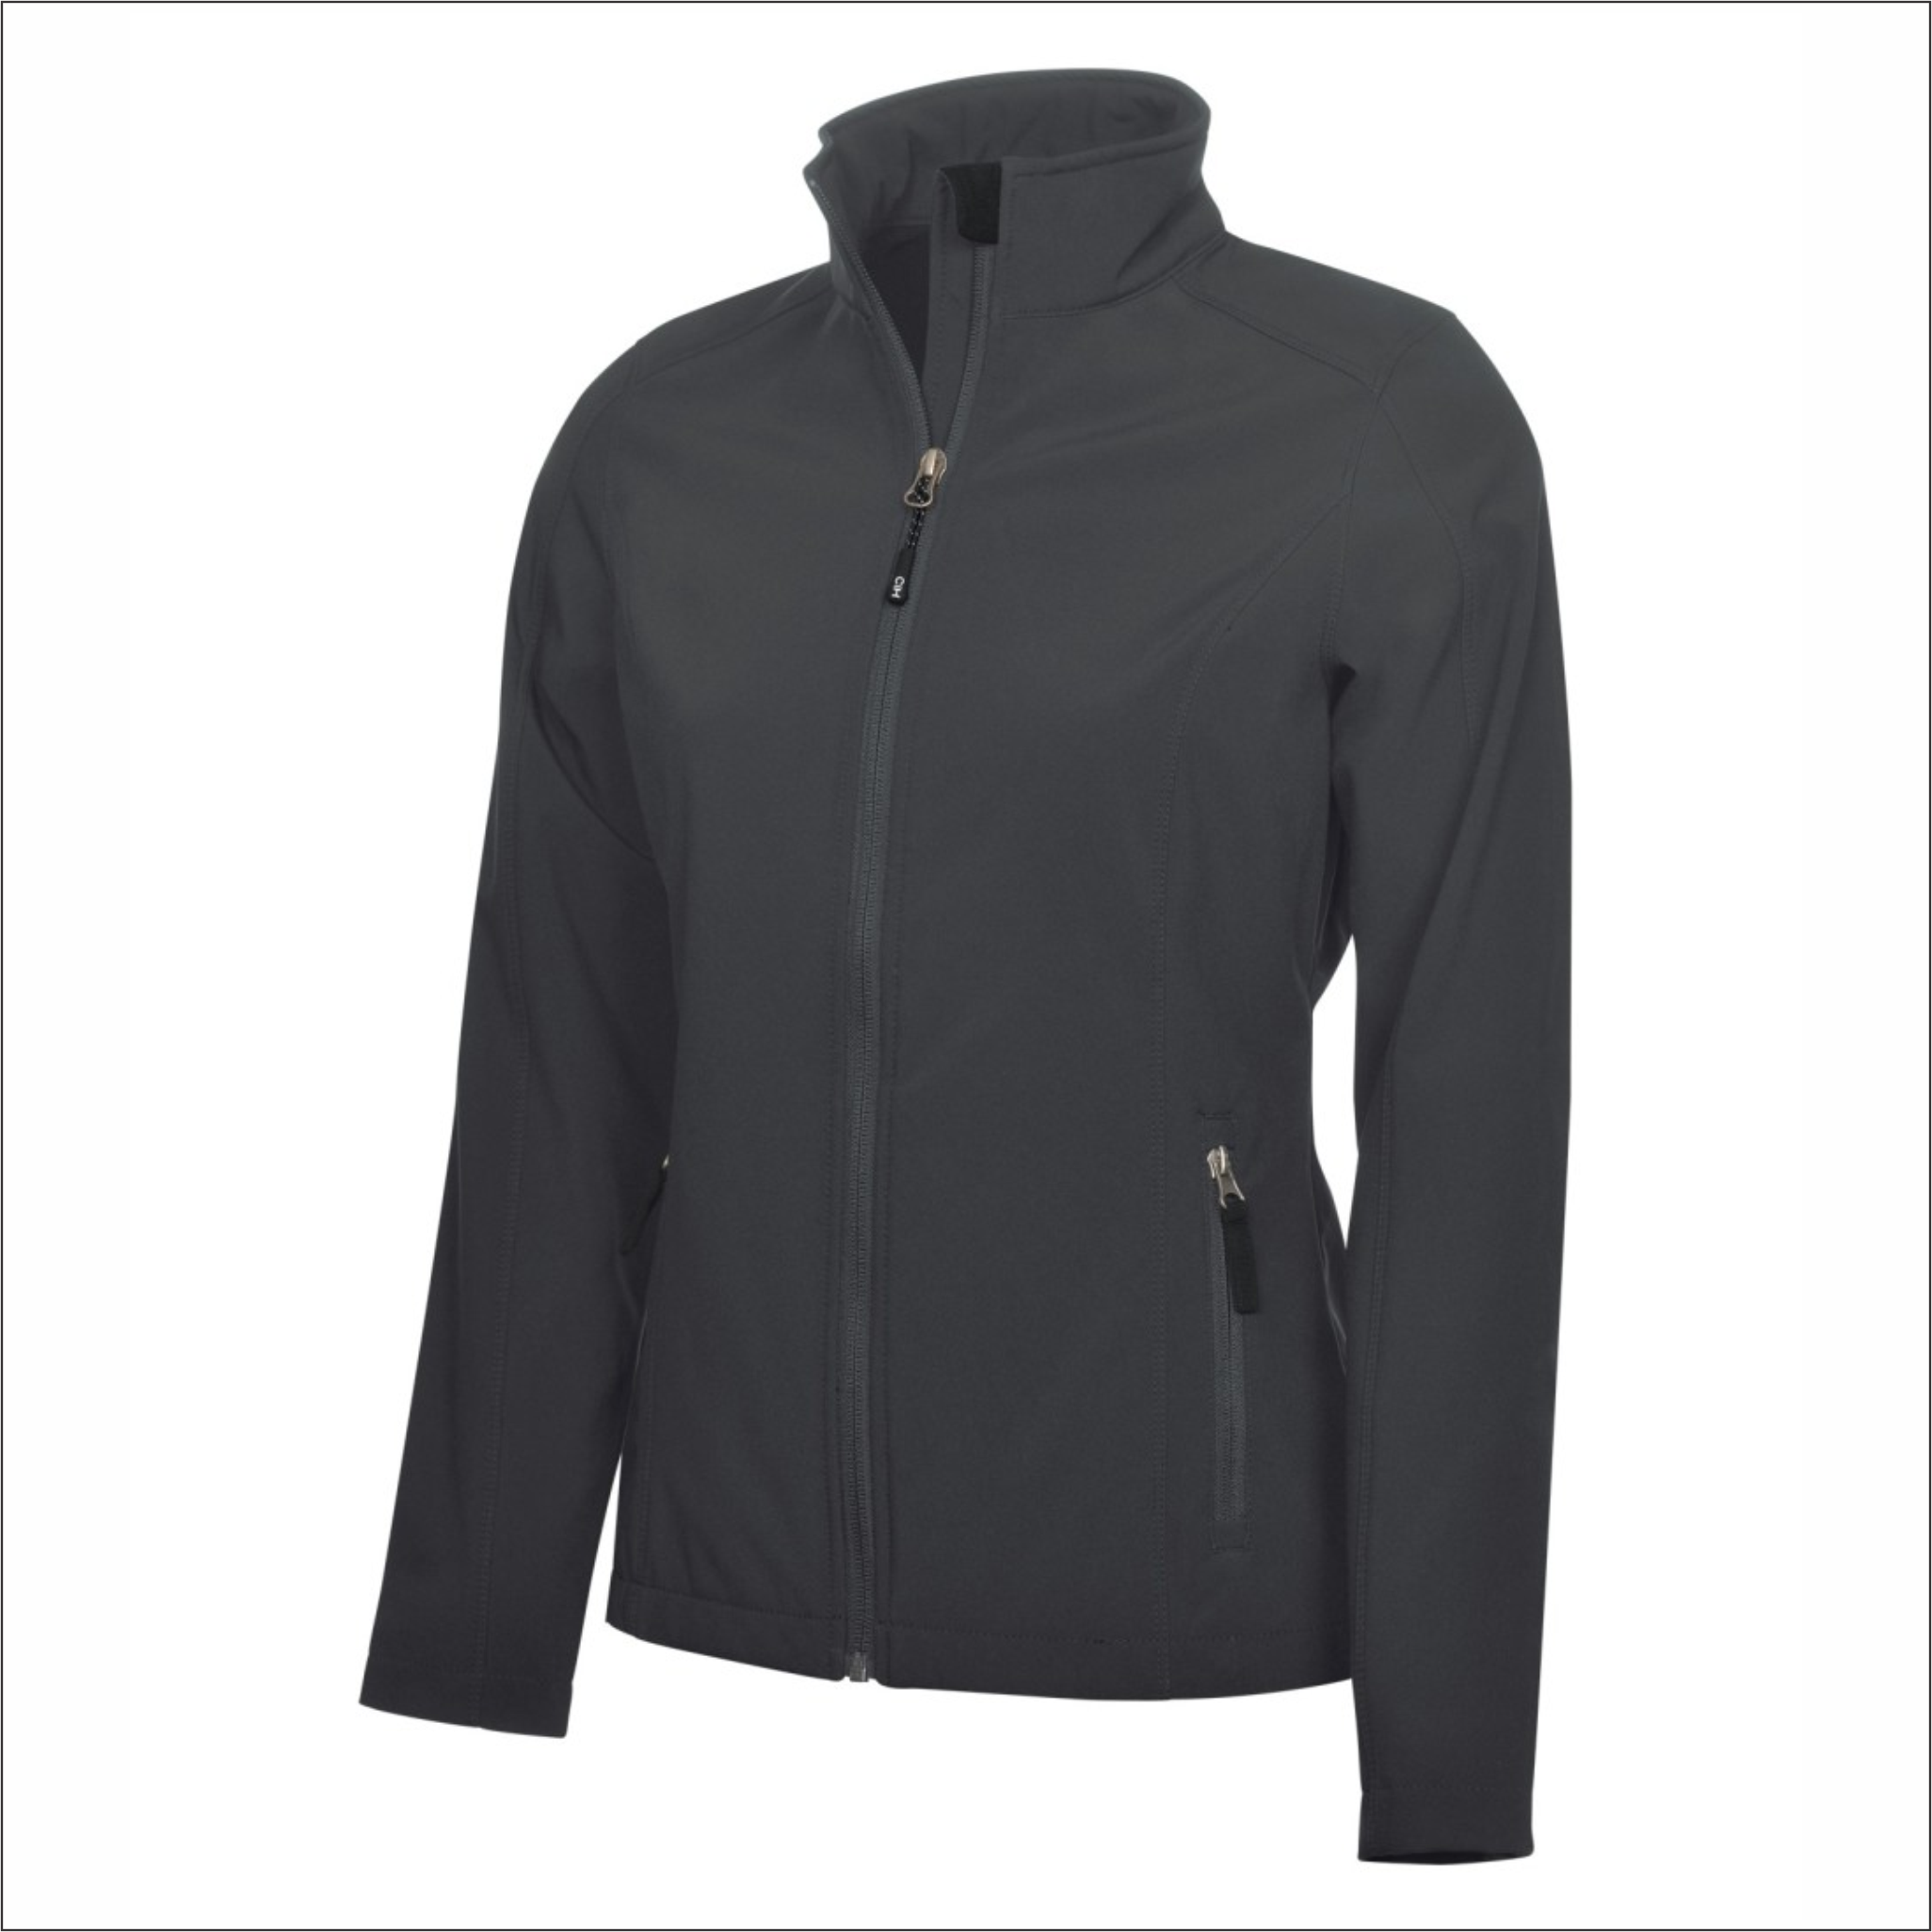 Everyday Water Repellent - Soft Shell Ladies Jacket - Coal Harbour L7603